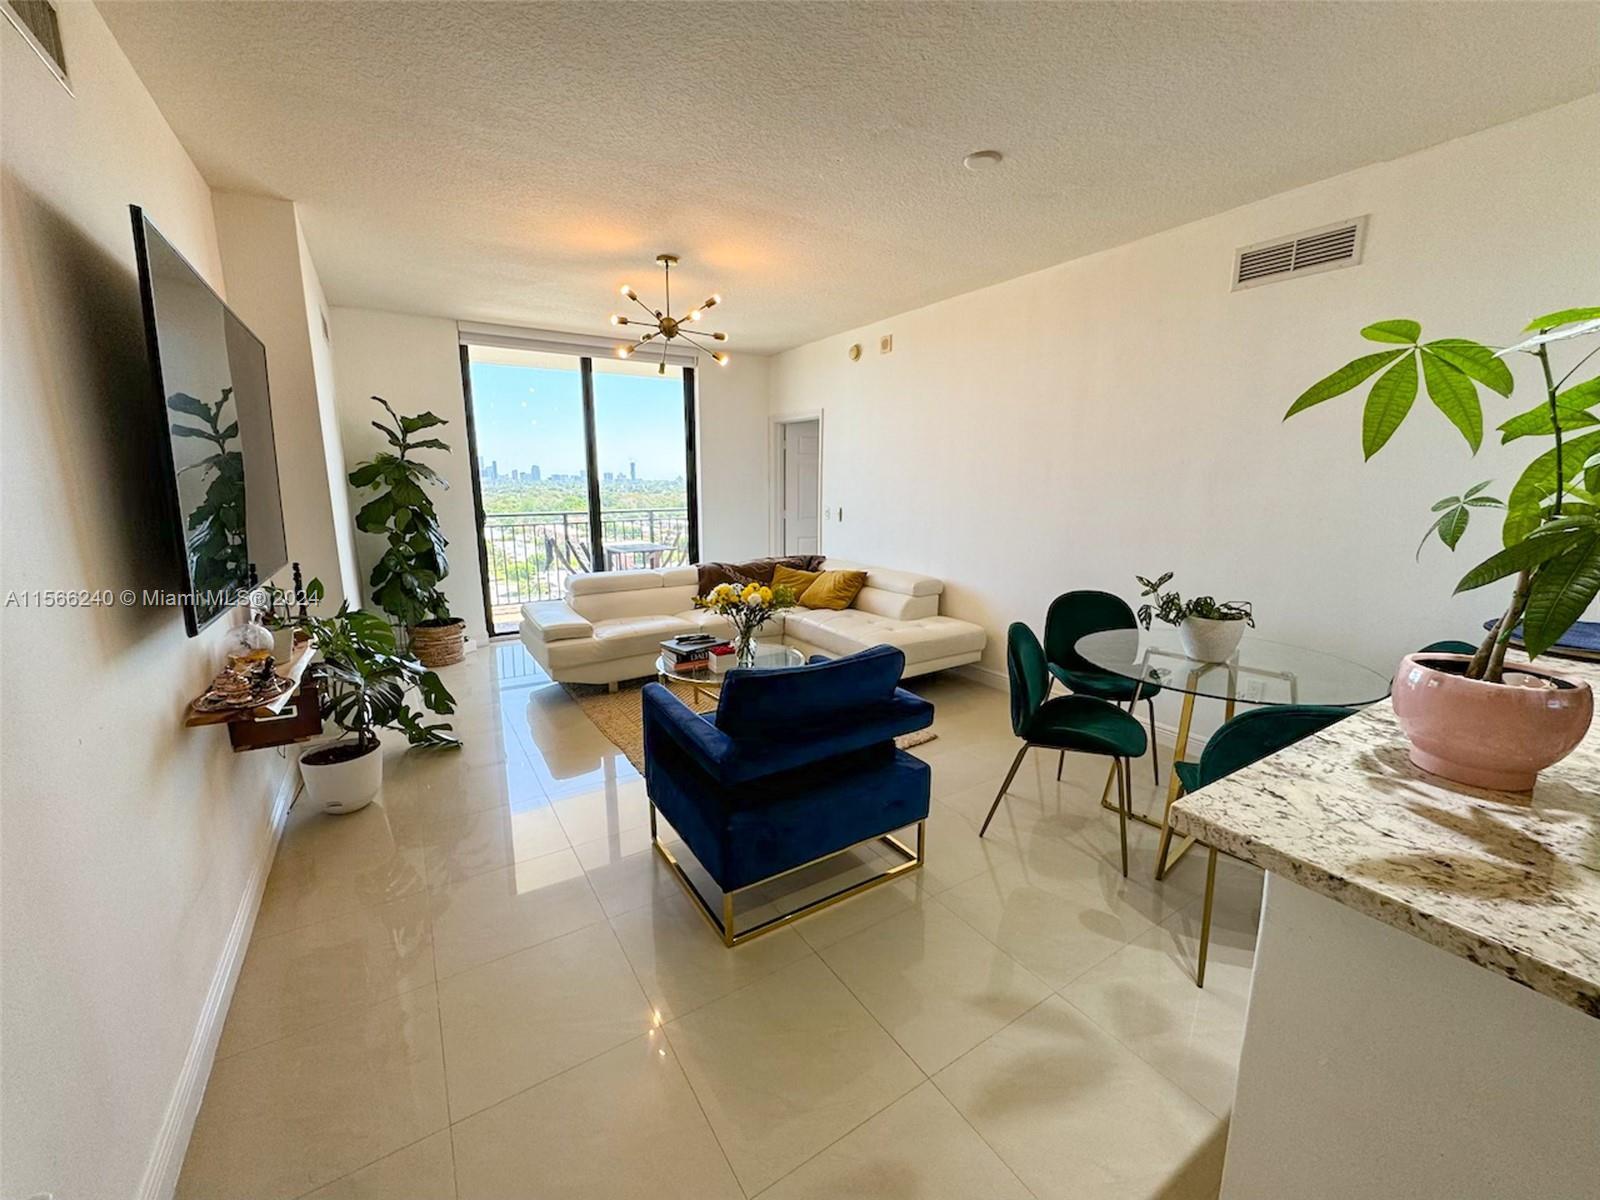 This is one of the best units in Puerta de Palmas at Coral Gables. It has two bedrooms and two bathr